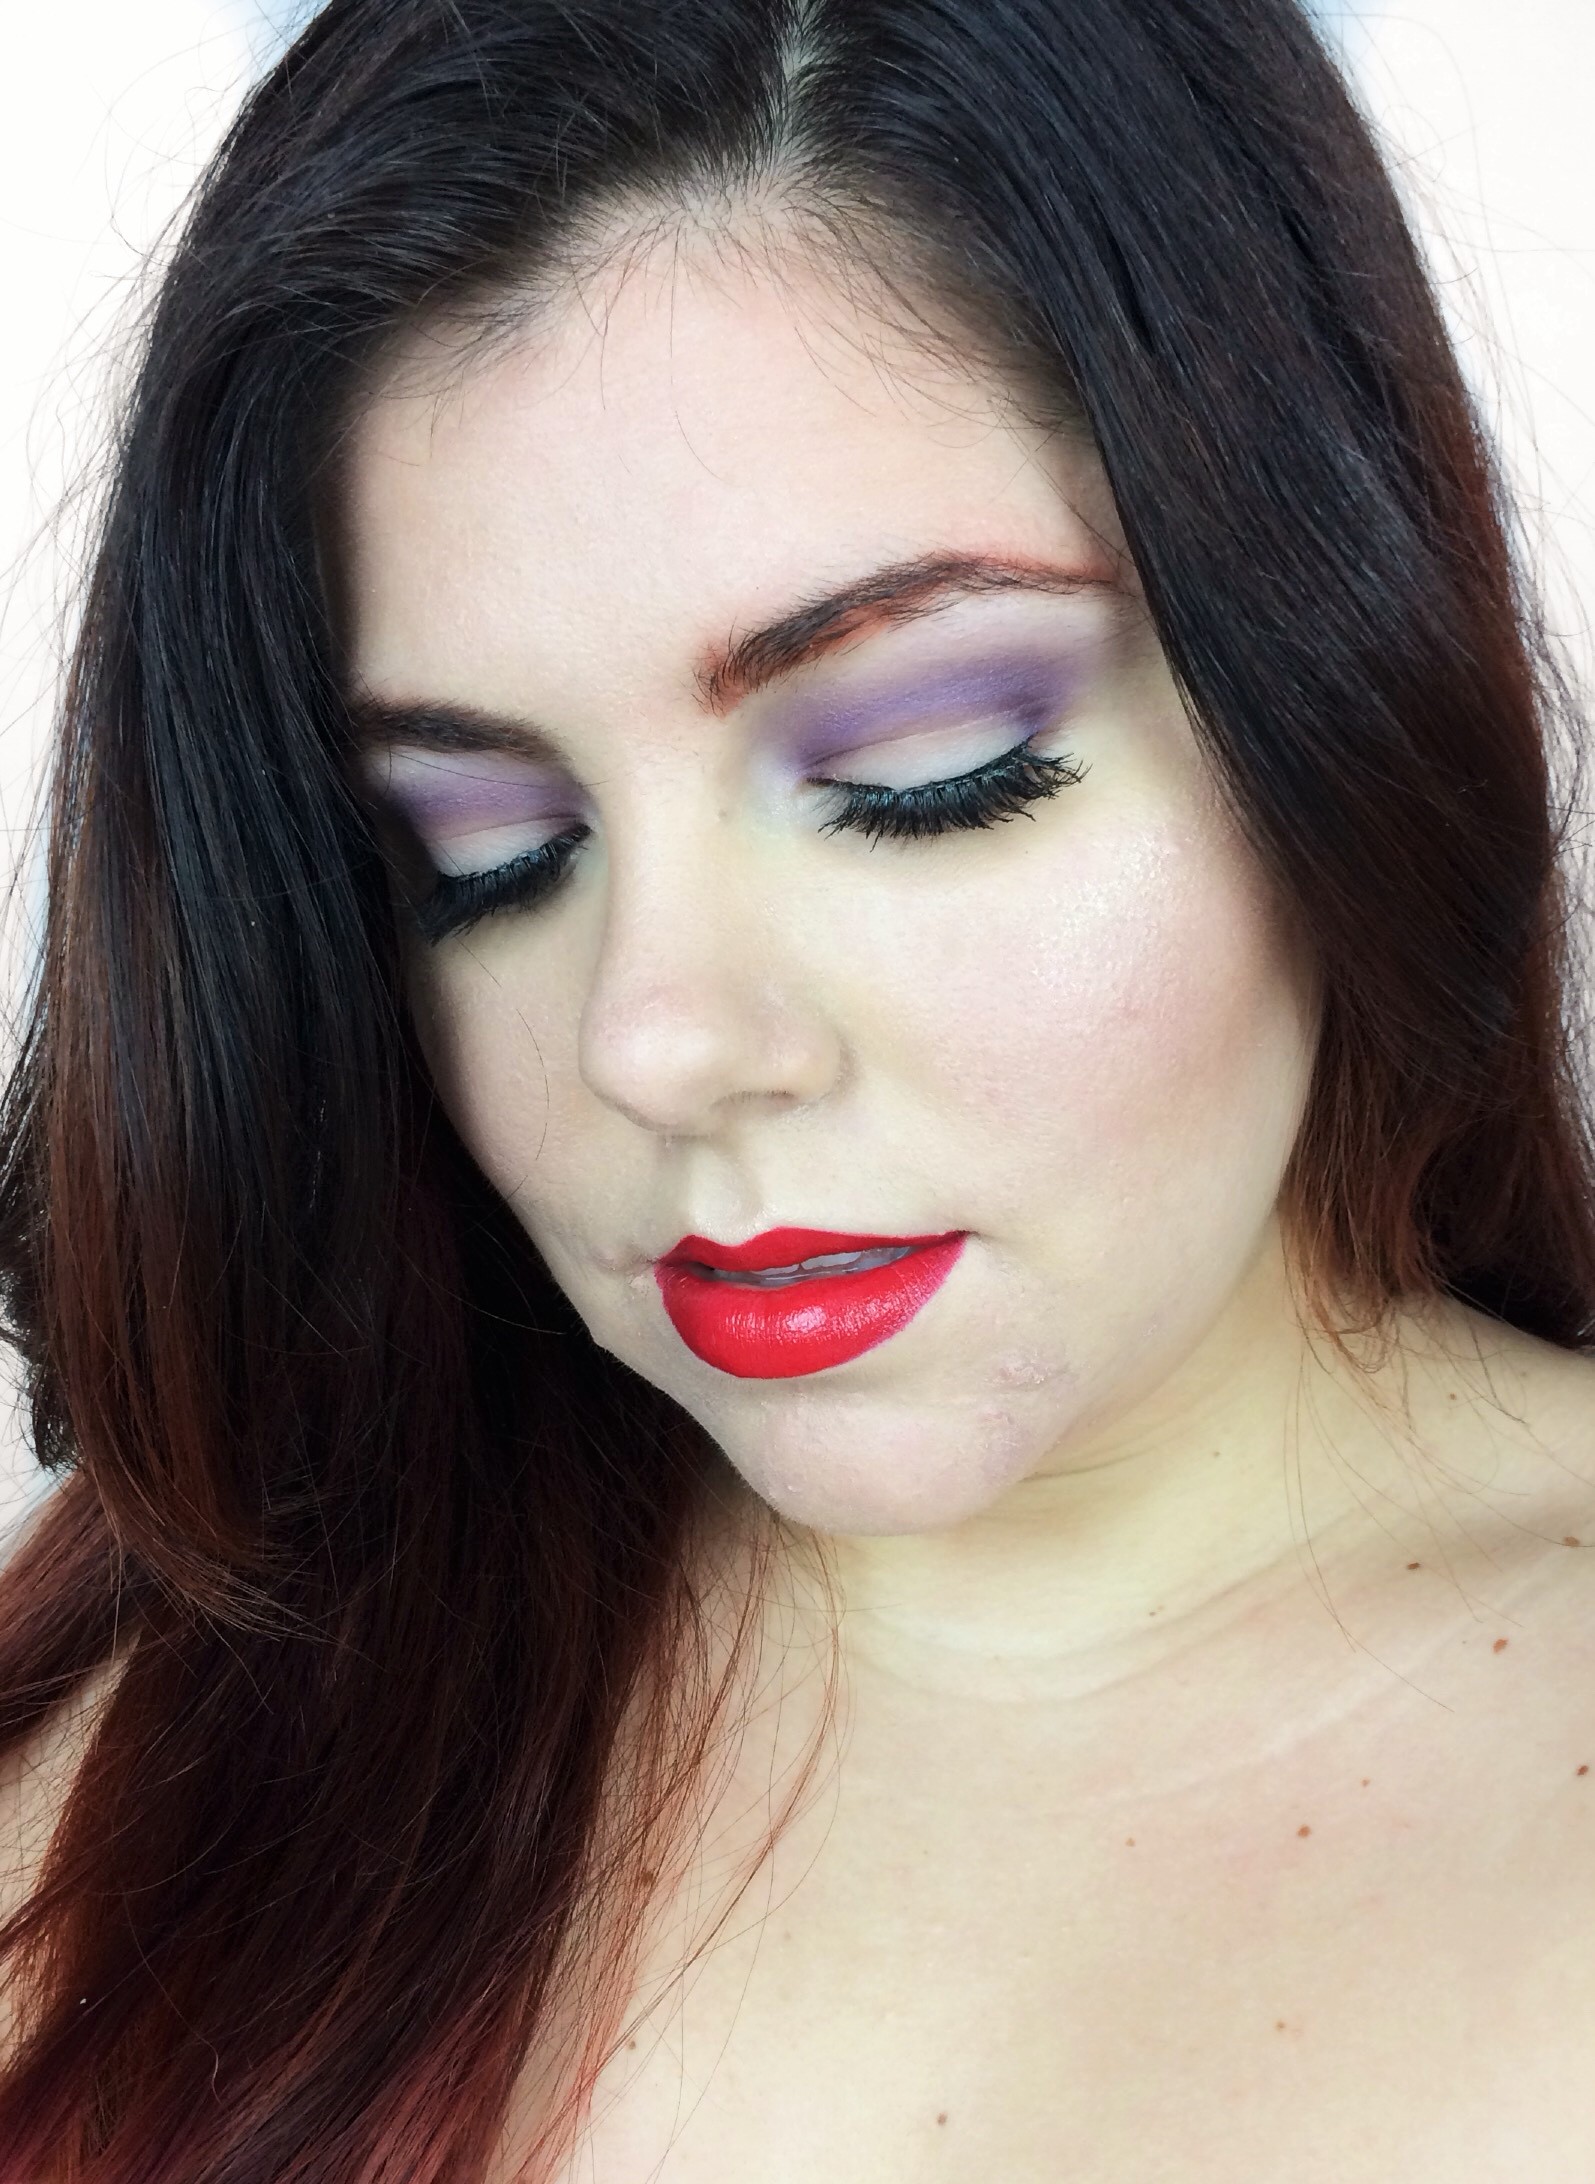 Jessica Rabbit Inspired Make Up Look [Click to Read More]